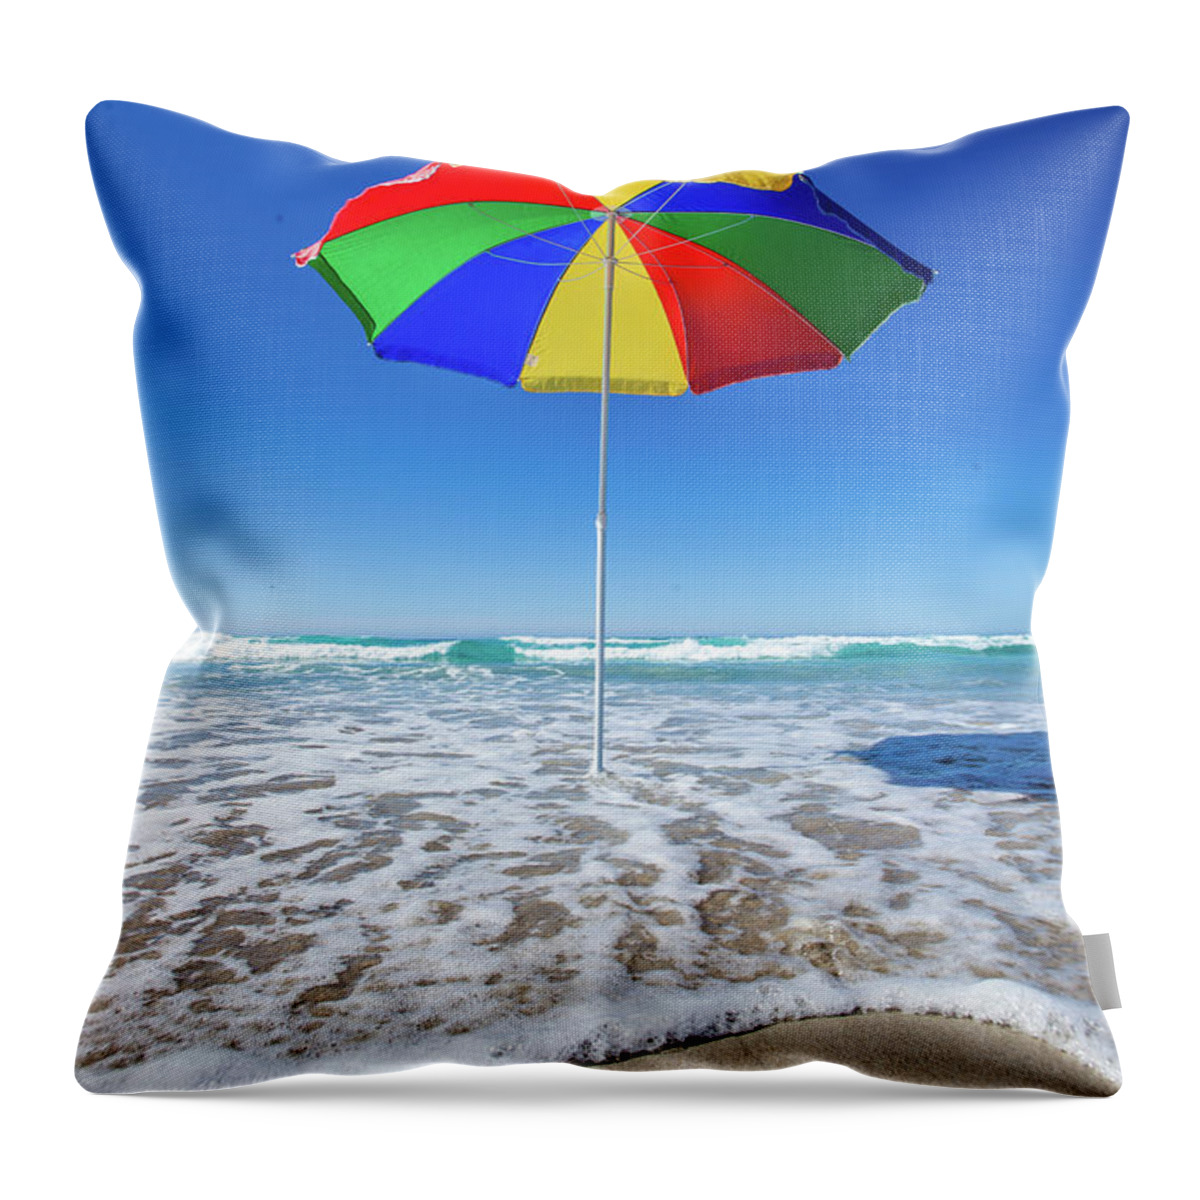 Tranquility Throw Pillow featuring the photograph Umbrella At The Beach by John White Photos